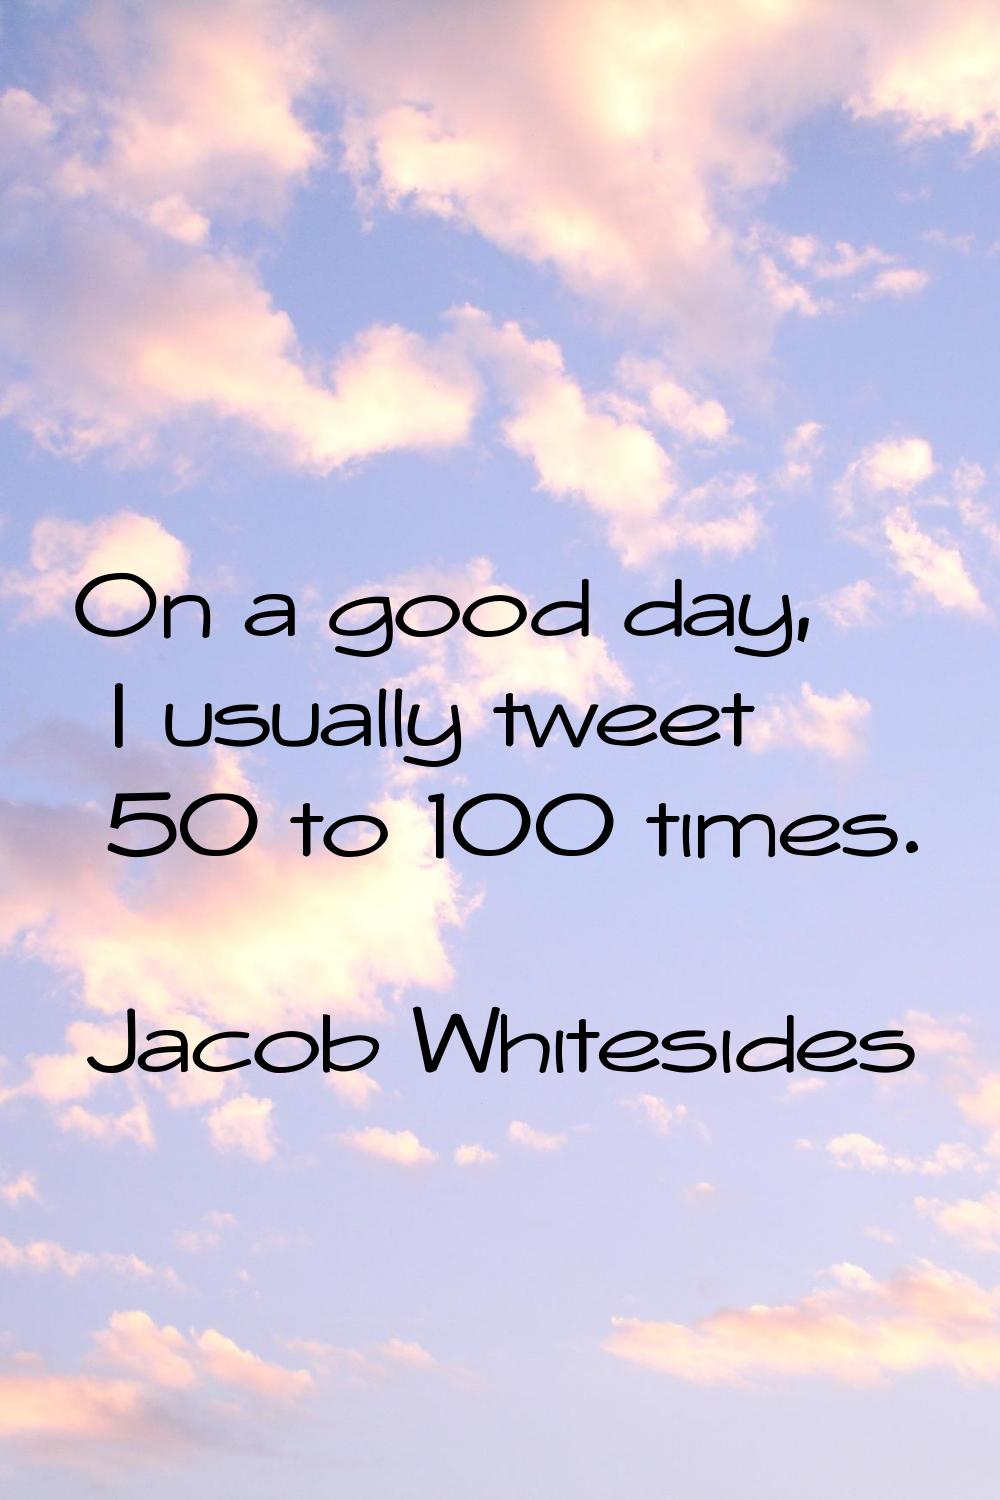 On a good day, I usually tweet 50 to 100 times.